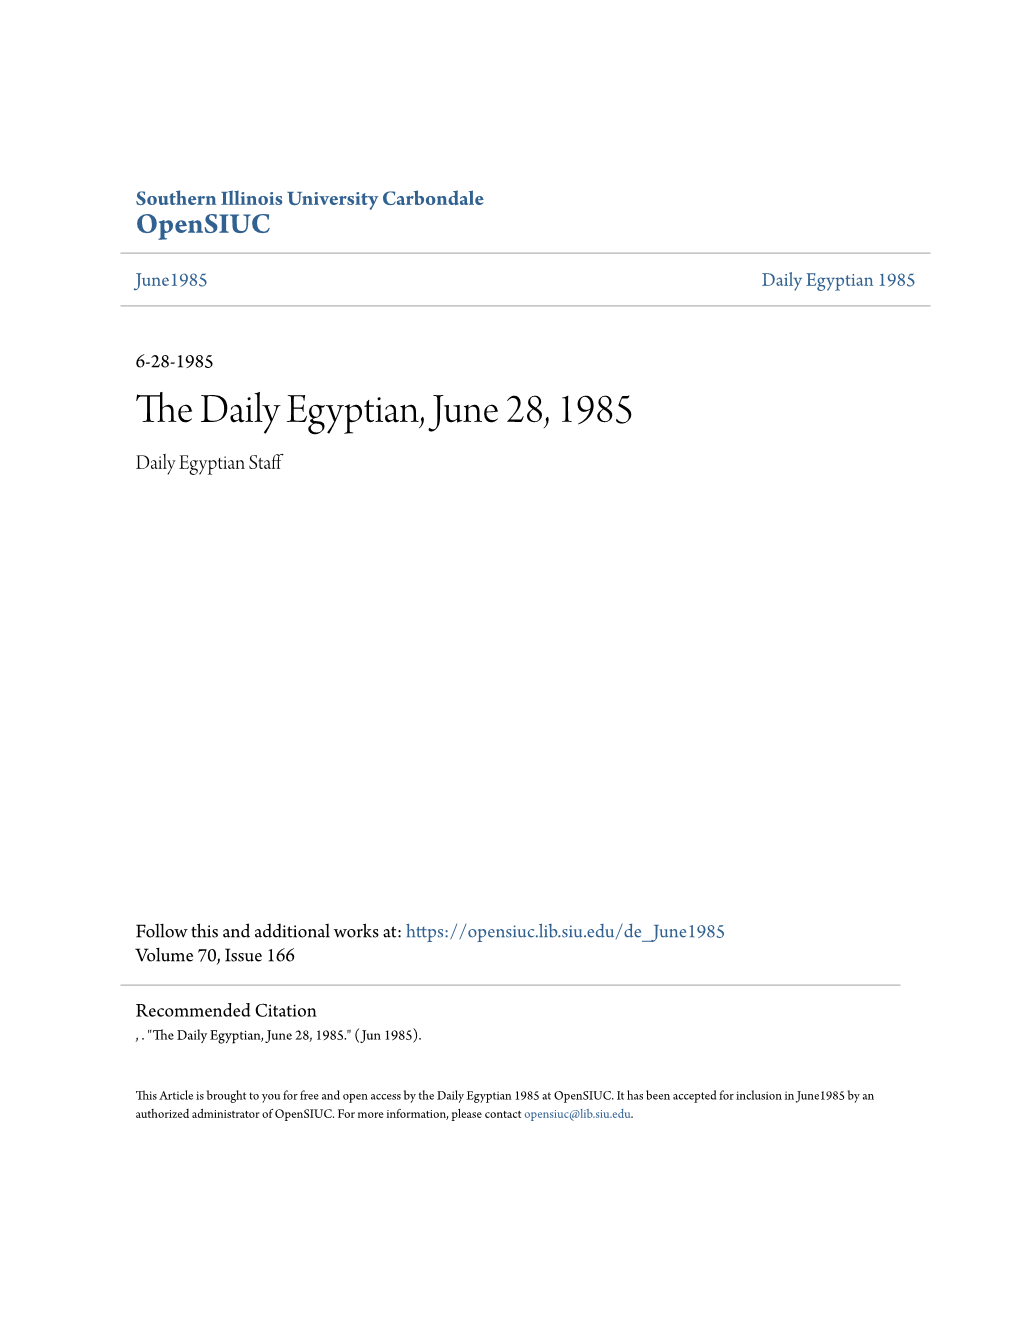 The Daily Egyptian, June 28, 1985